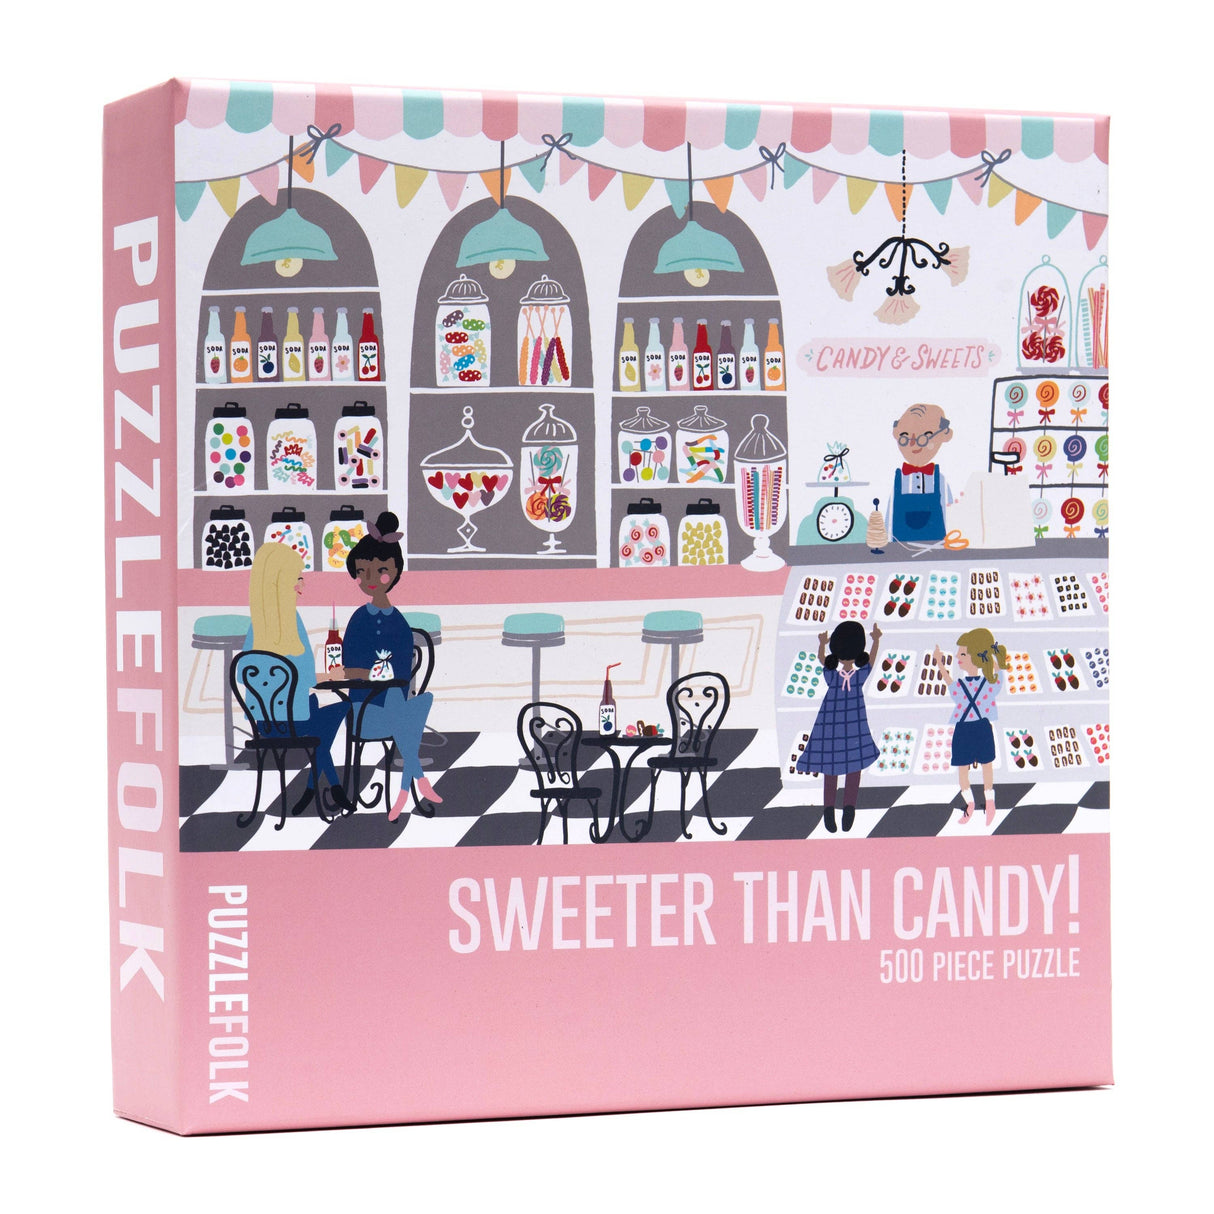 Candy Shop puzzle - Sweeter than Candy by Puzzlefolk 500 piece puzzle